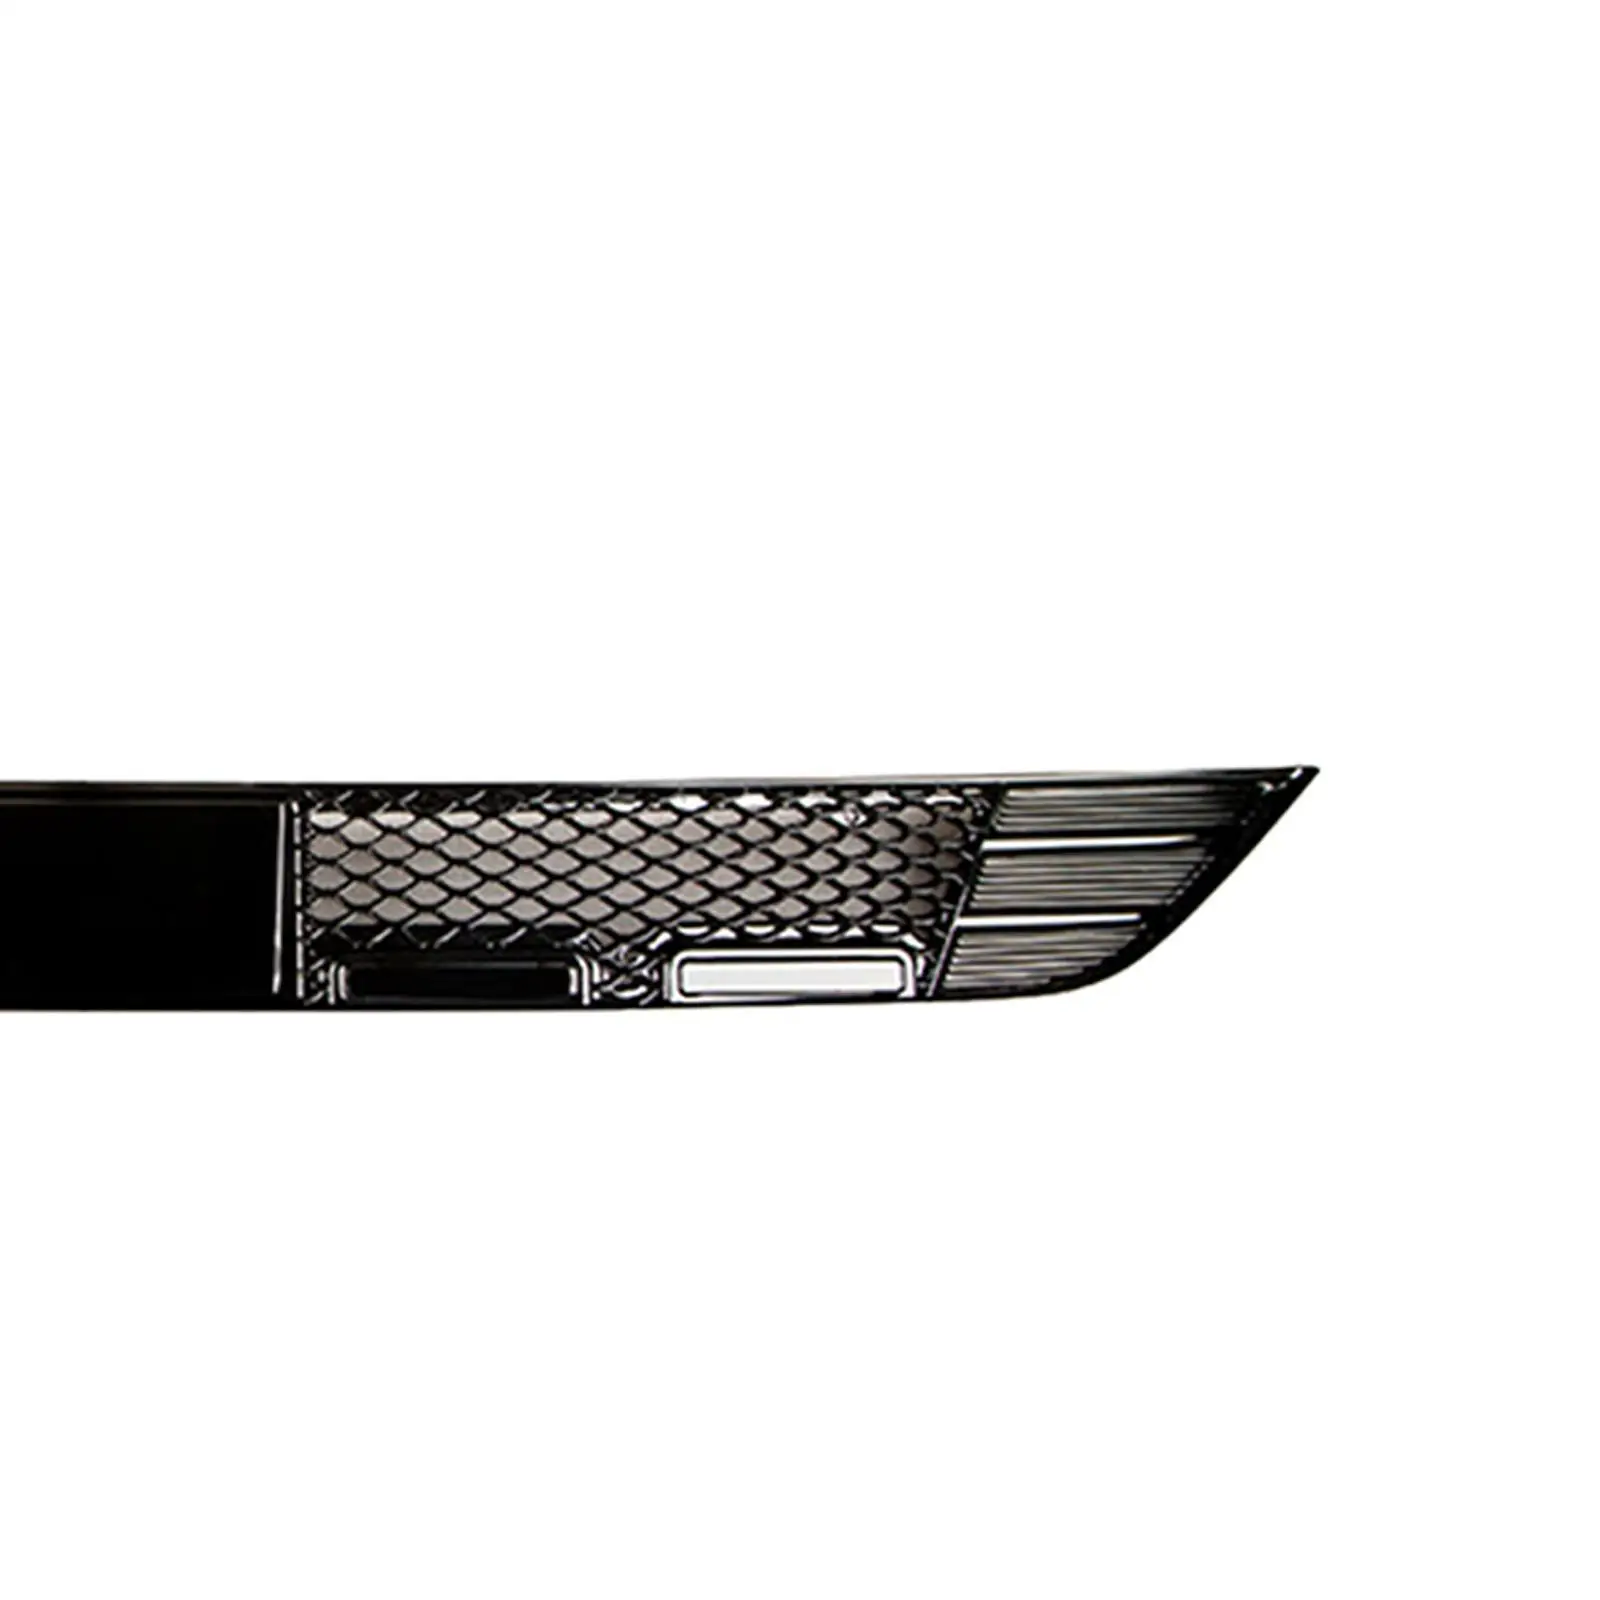 Front Grill Mesh Grille Cover Car Front Grille Net for Byd Atto 3 Yuan Plus